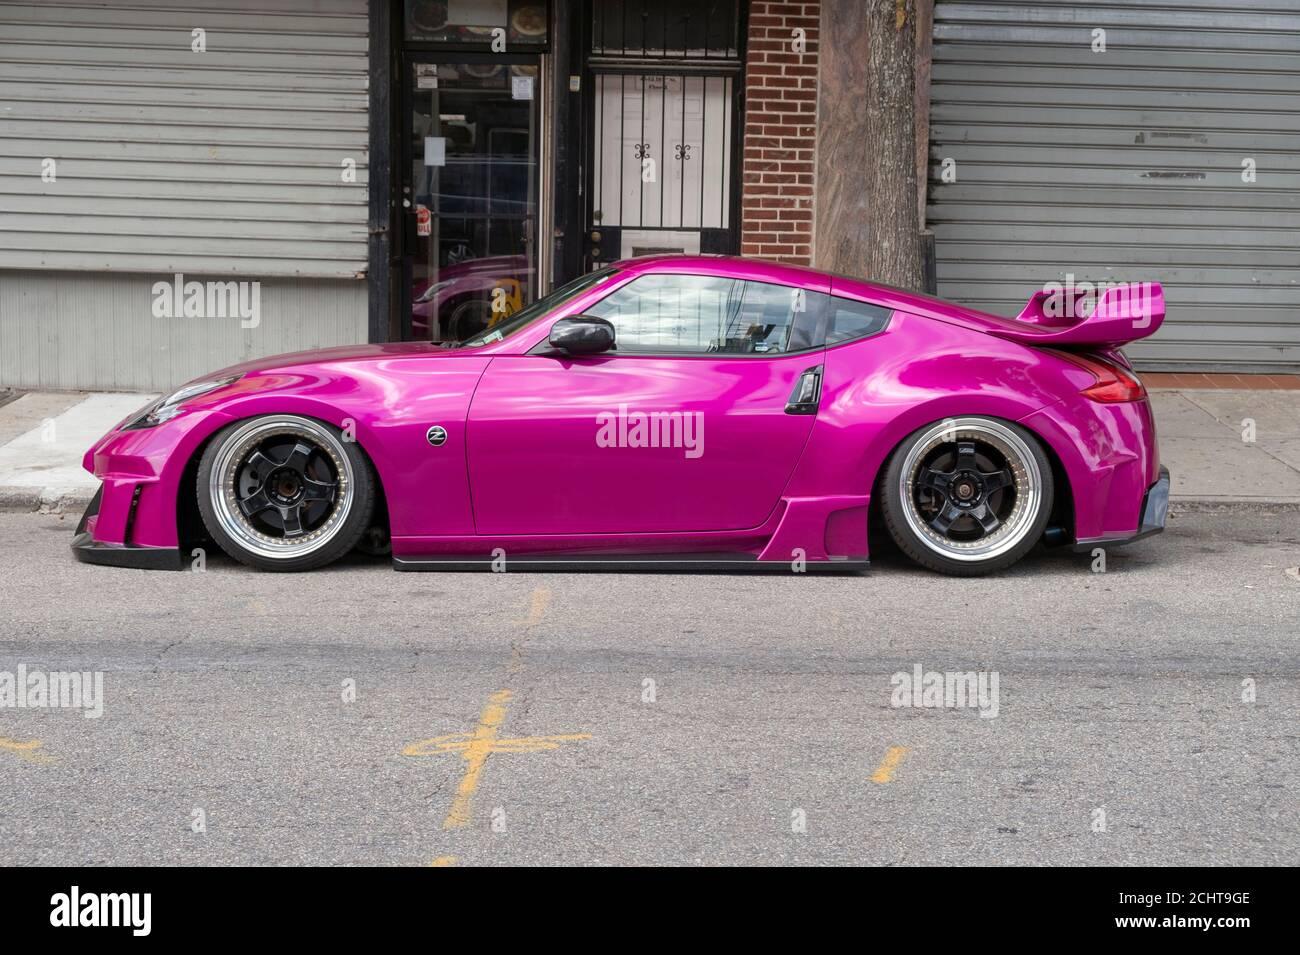 A Customized Magenta Nissan Modified By The Japanese Pany